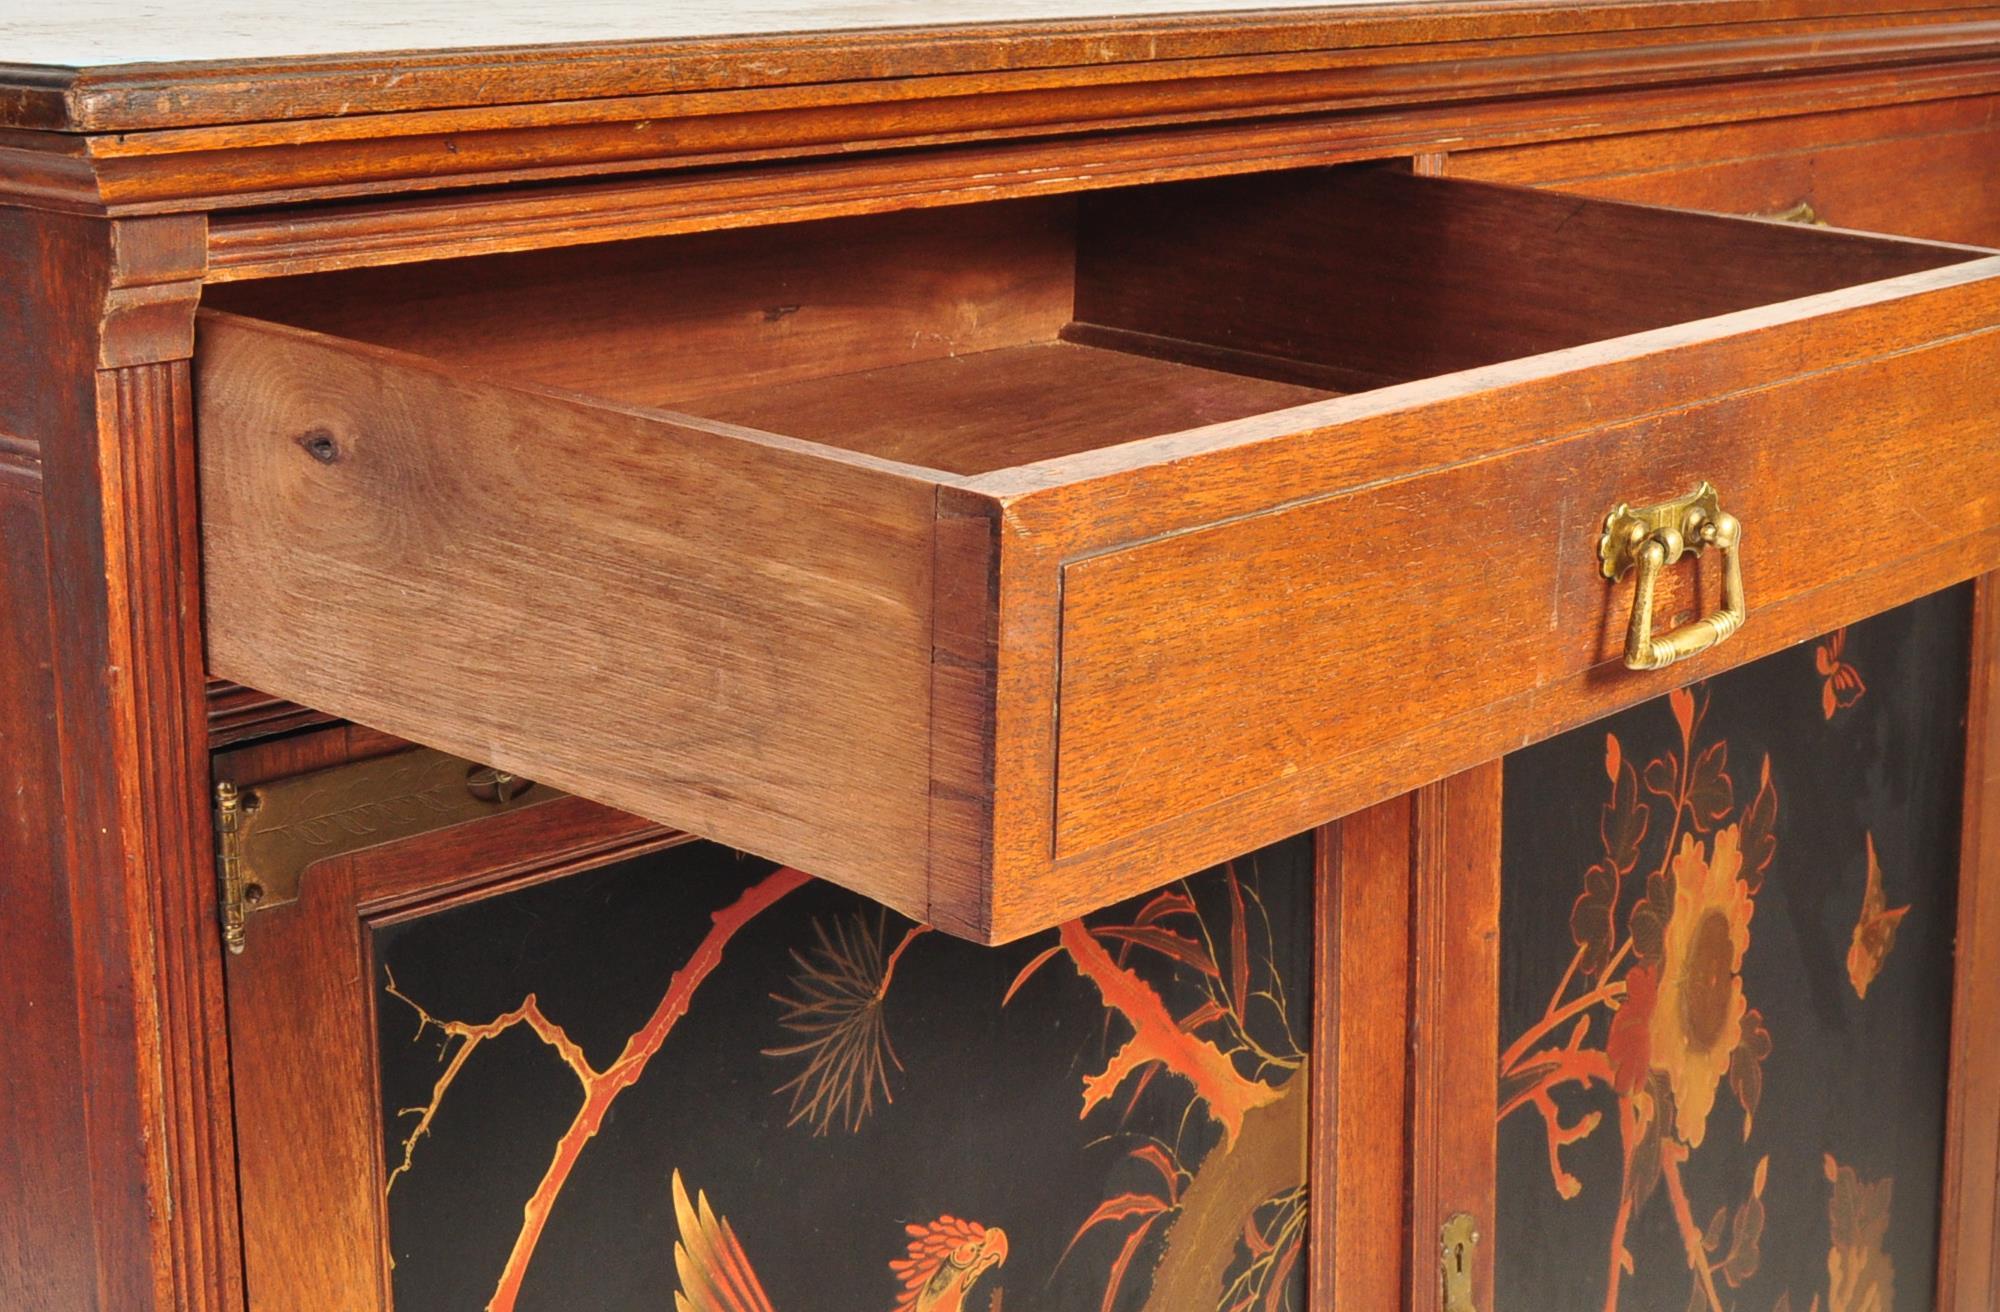 EARLY 20TH CENTURY ARTS AND CRAFTS MAHOGANY SIDEBOARD - Image 4 of 7